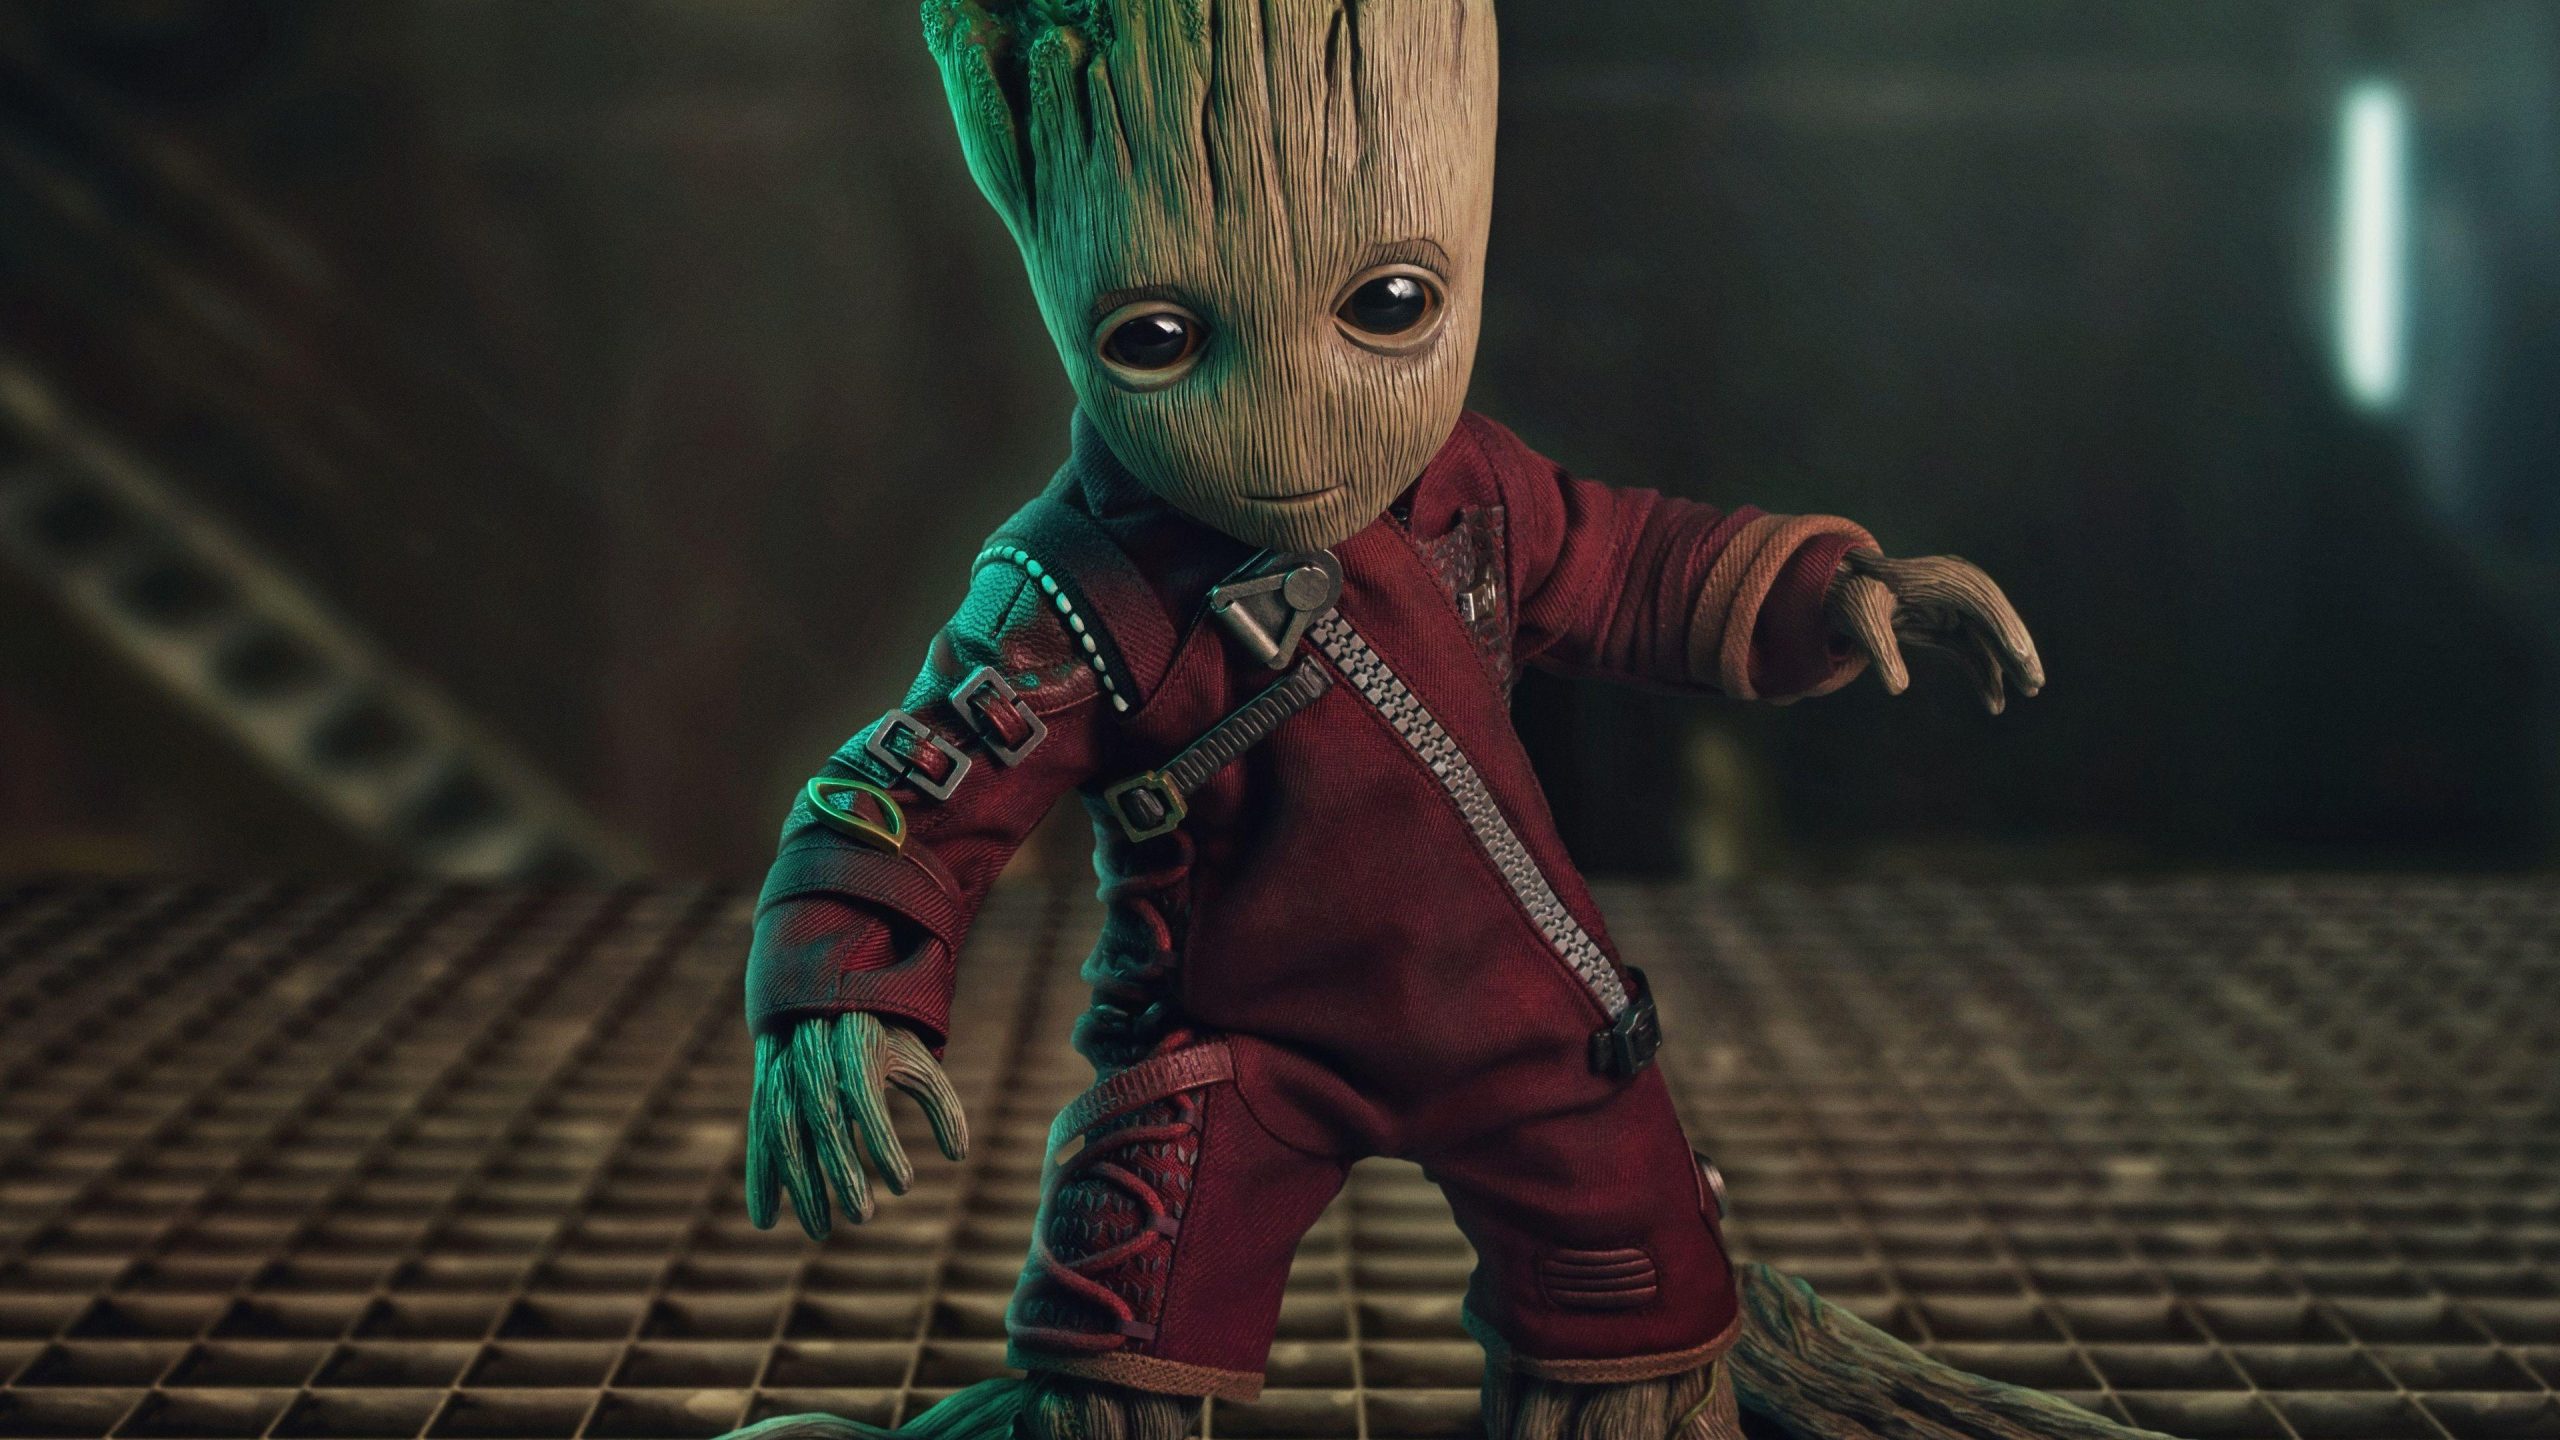 Cute Baby Groot Guardians Of The Galaxy 4k Wallpaper, Cute Baby Groot Guardians Of The Galaxy, Movies